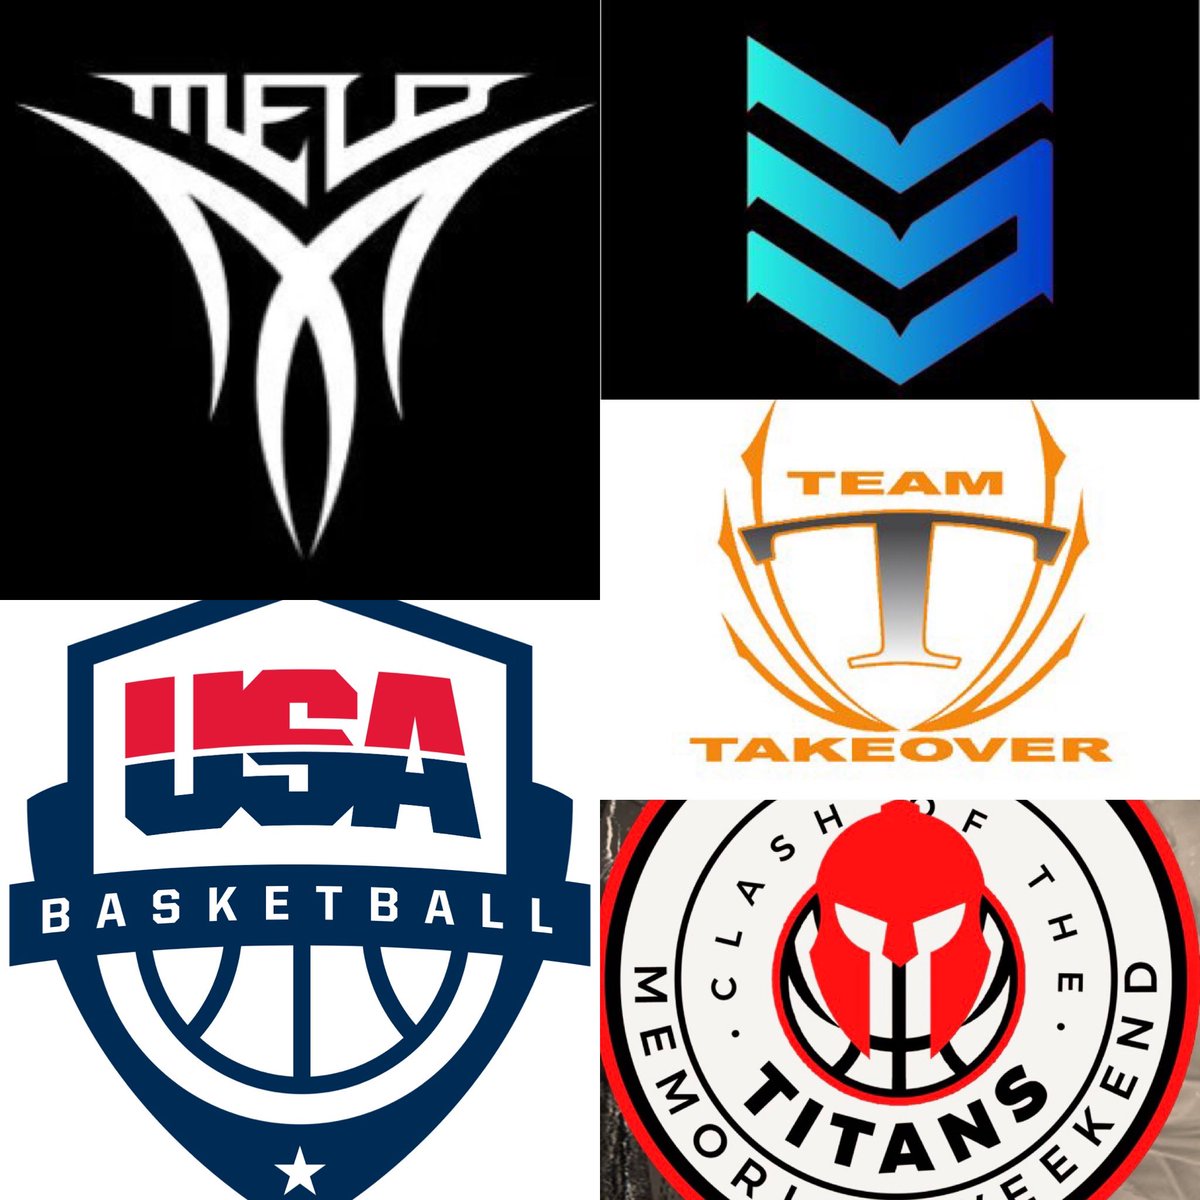 DMV Notebook: Memorial Day Weekend -@TTOBasketball’s weekend in KC -@camabucket’s loud weekend -@yeadathype finding his groove -DMV duo makes USA U18 roster -Quick hitters fromClash of the Titans 👉✍️: madehoops.com/made-society/a…